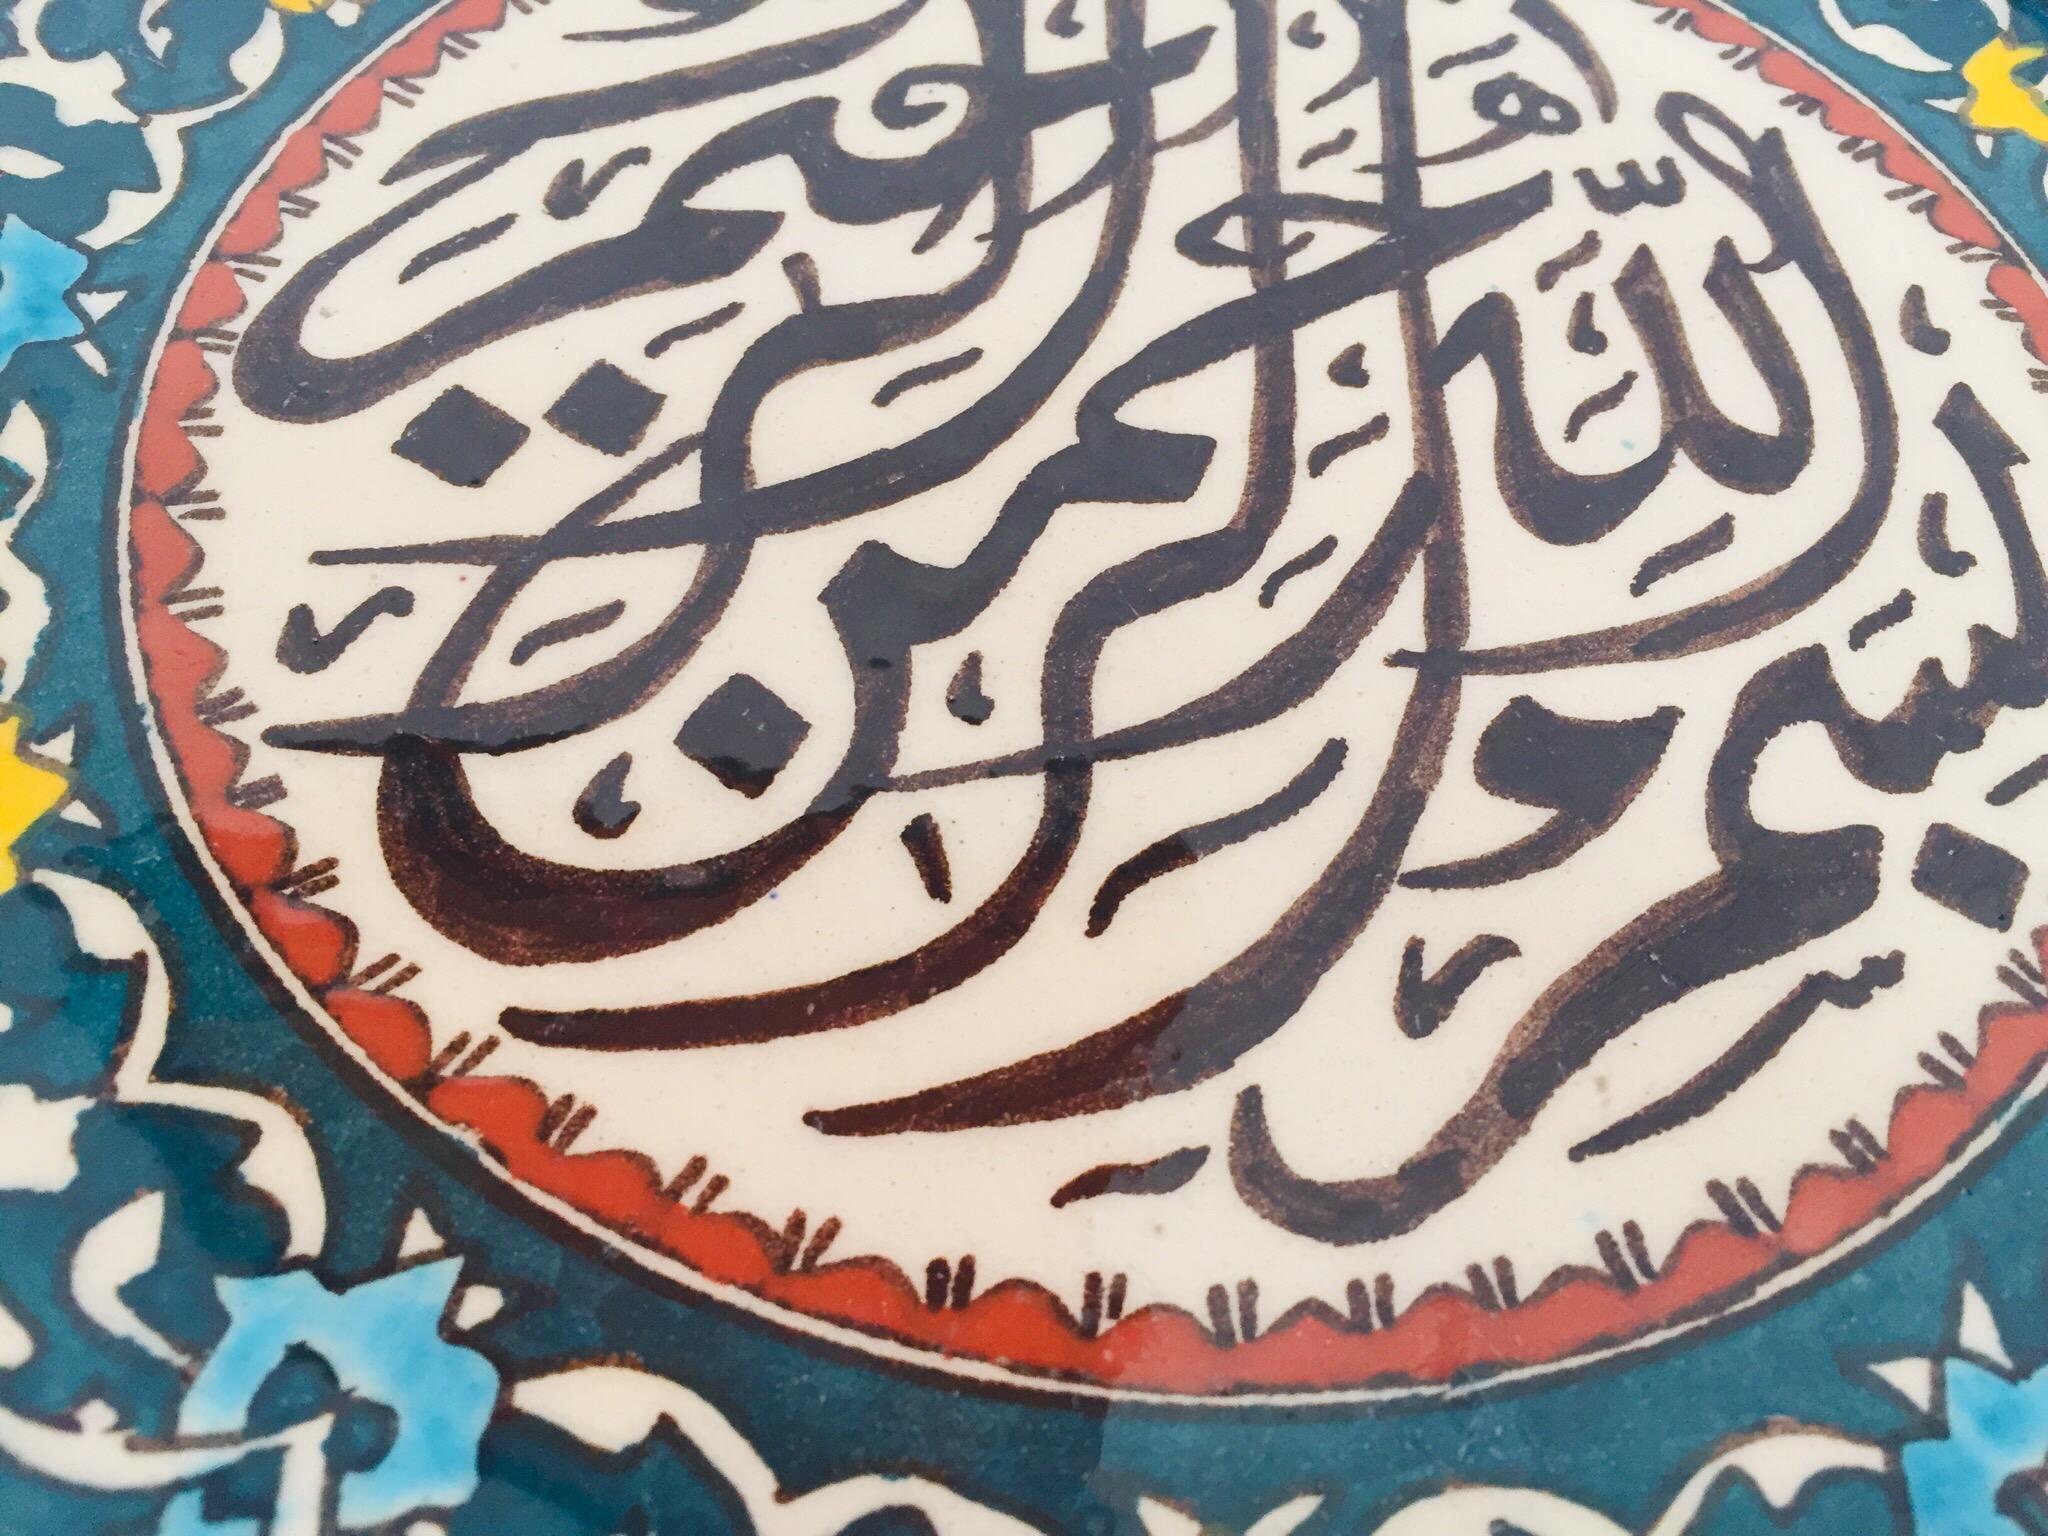 Hand-Painted Polychrome Hand Painted Ceramic Decorative Plate with Islamic Calligraphy For Sale